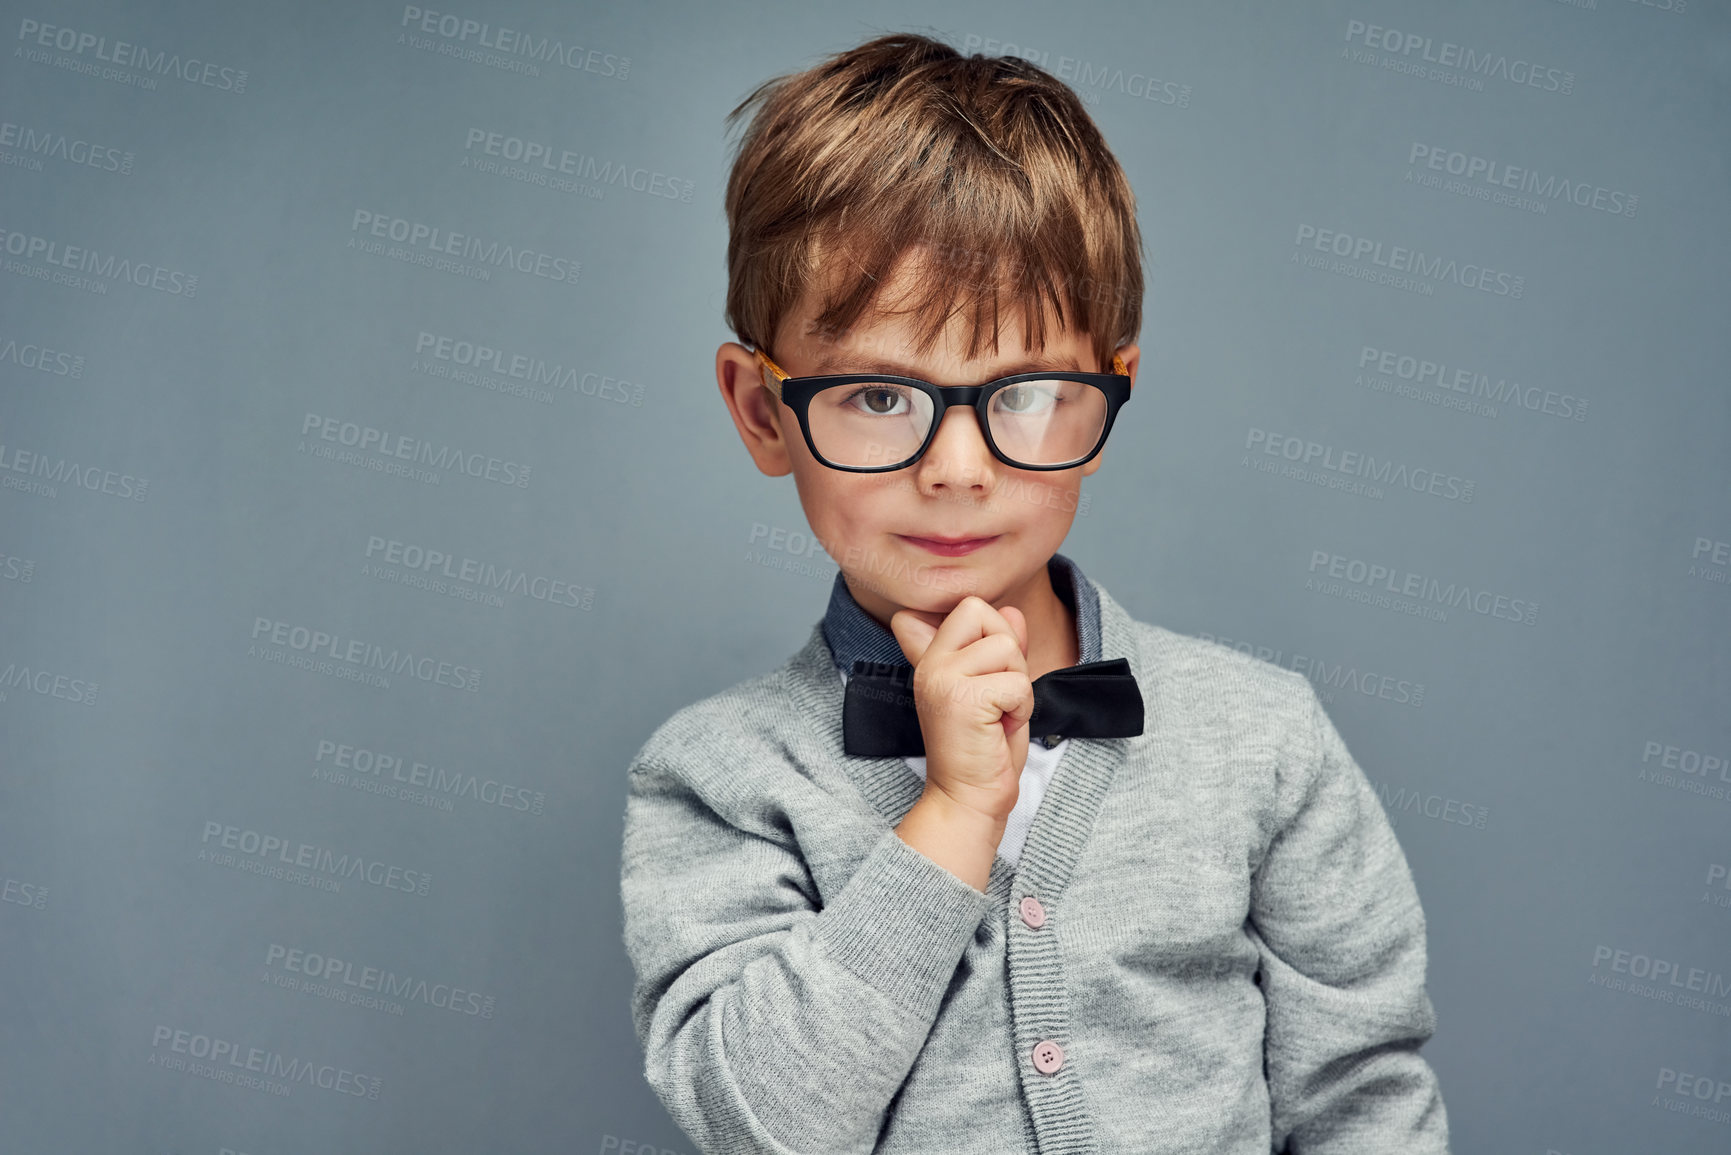 Buy stock photo Studio portrait of a smartly dressed little boy posing confidently against a gray background